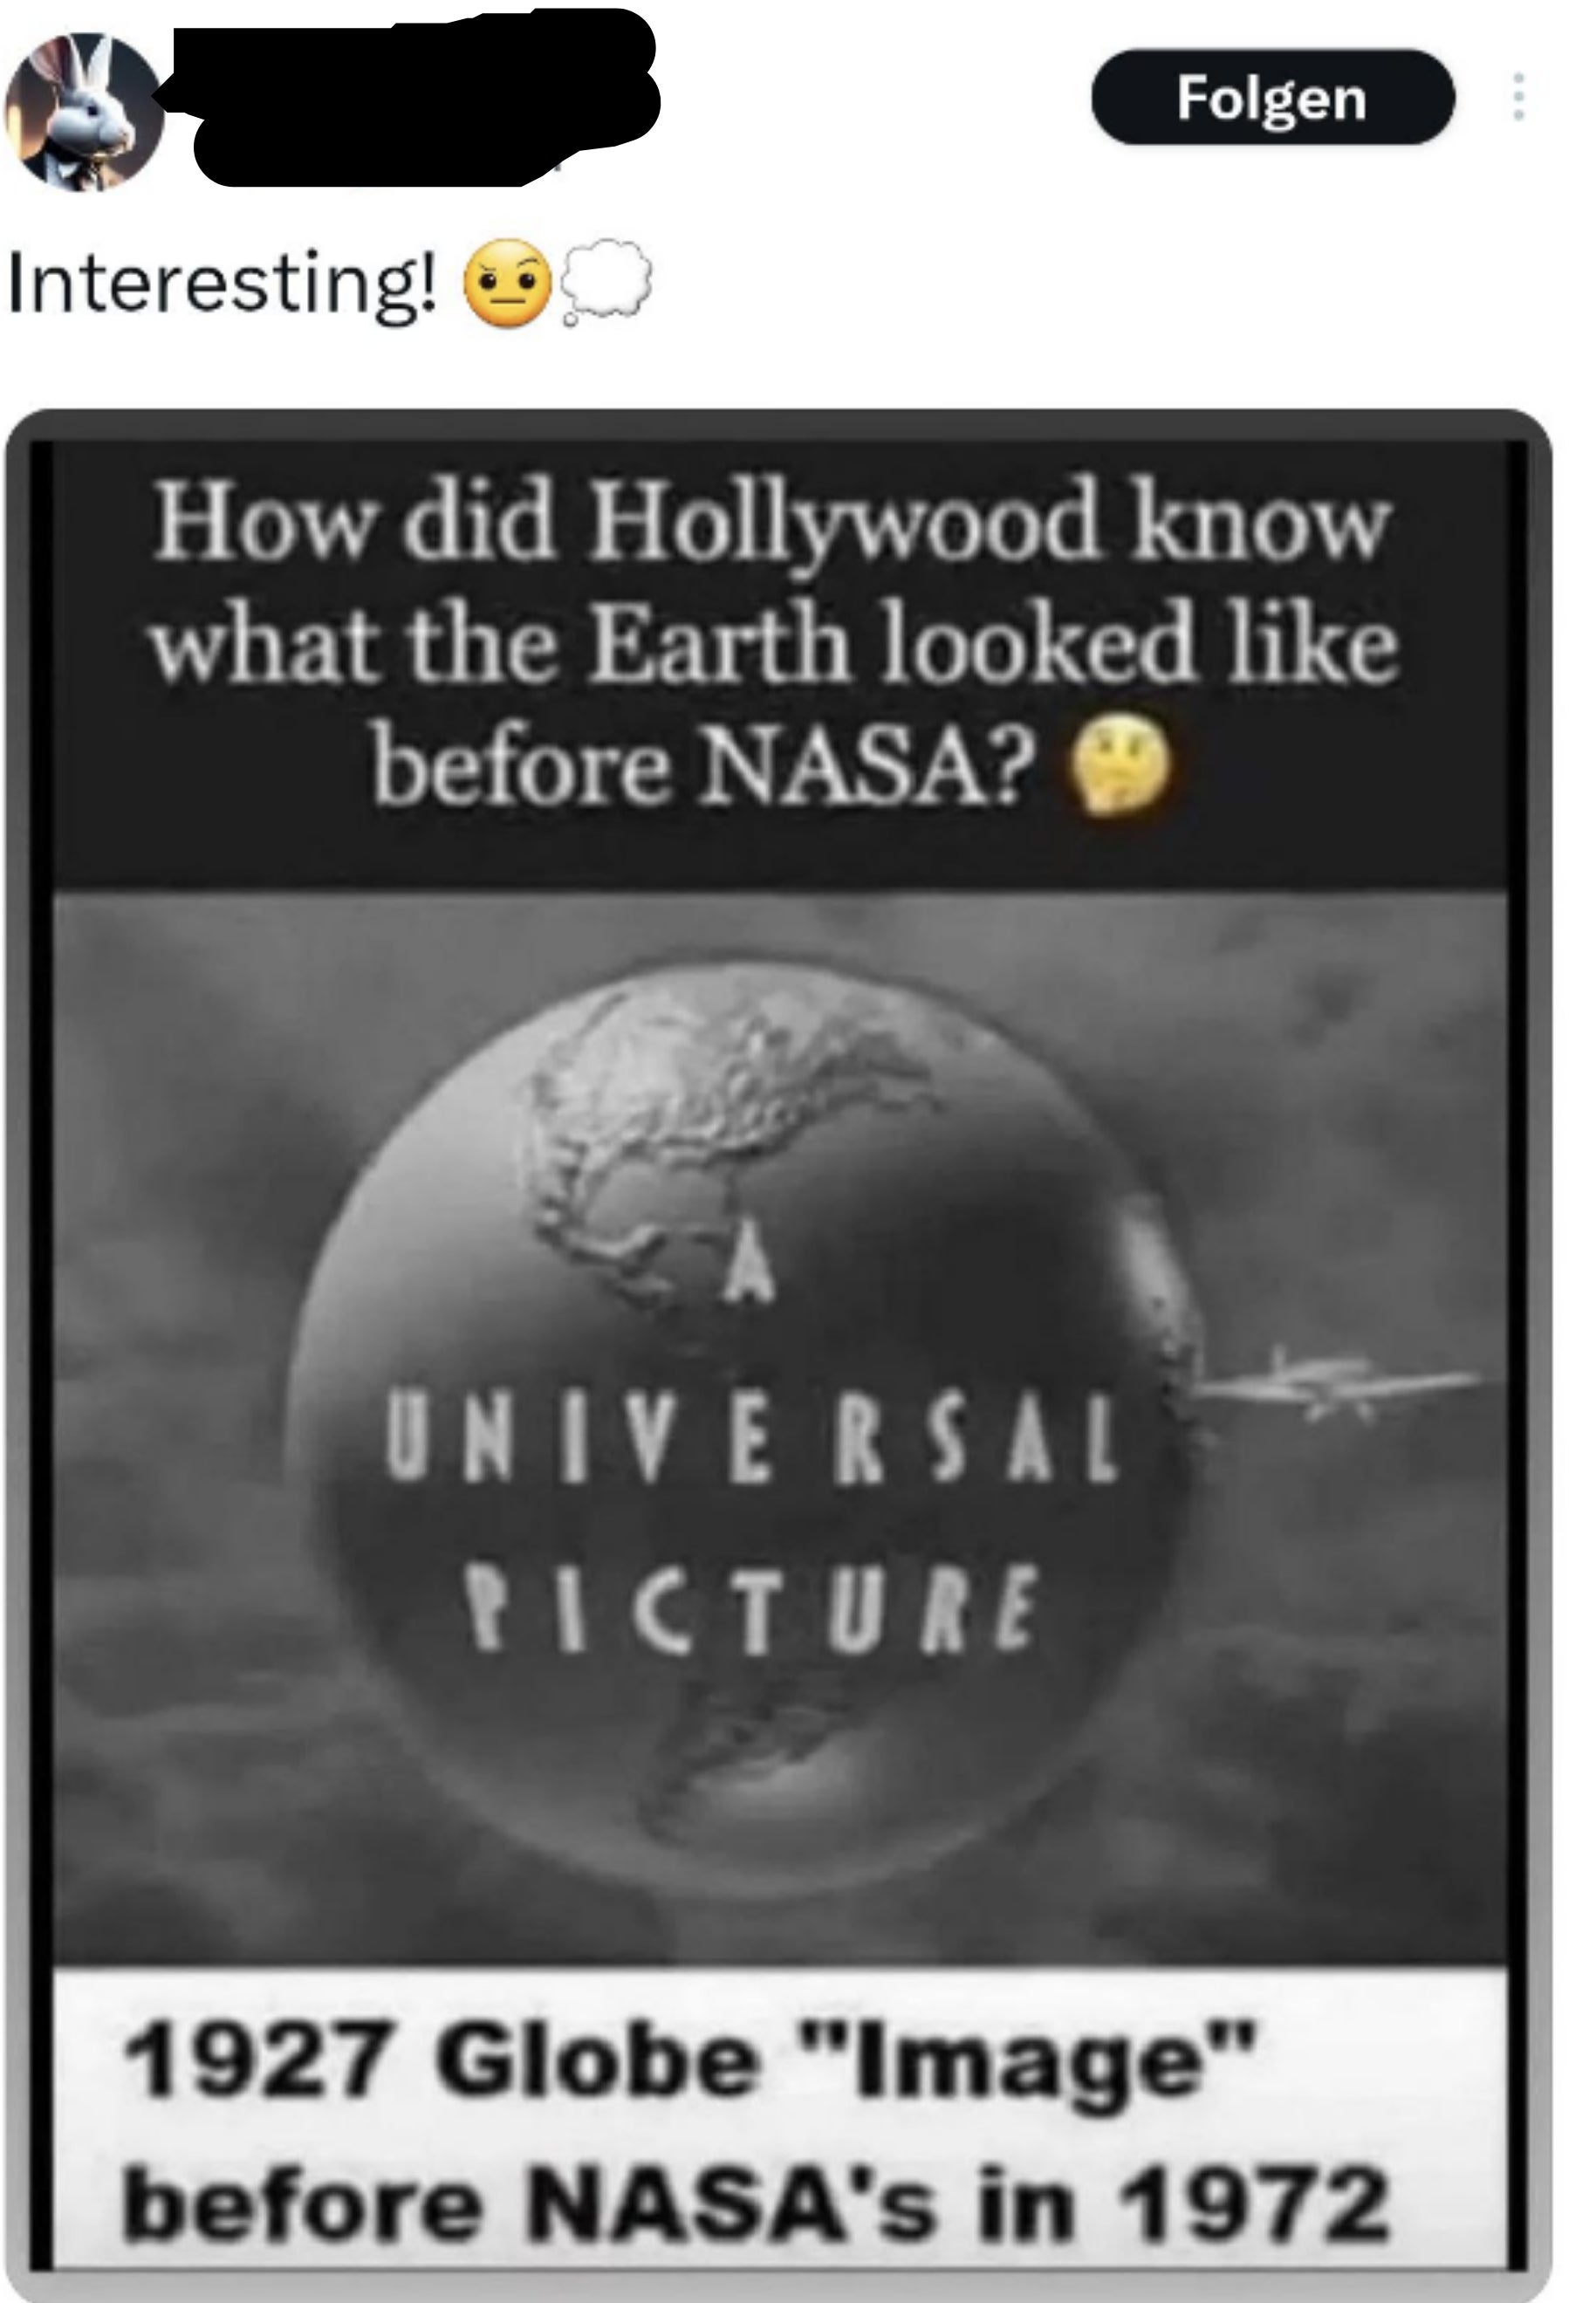 &quot;How did Hollywood know what the world looked like before NASA&quot;